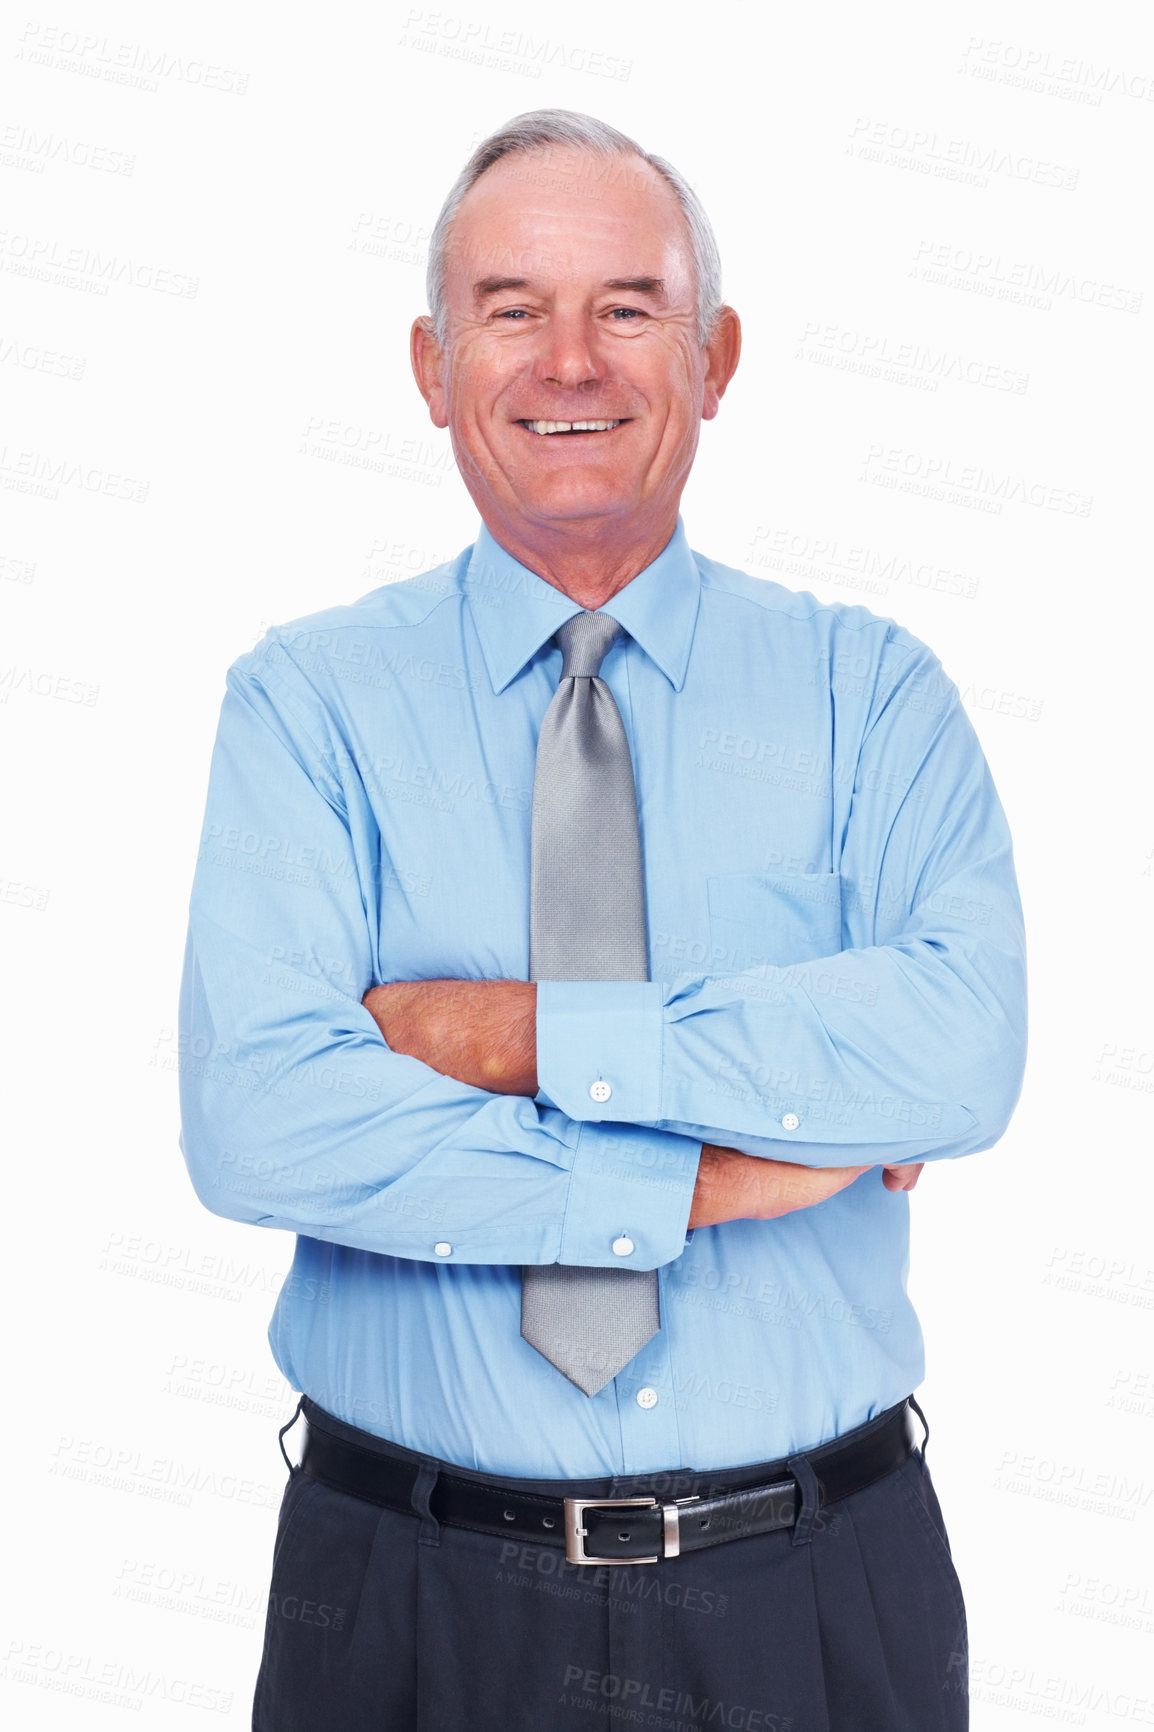 Buy stock photo Portrait of smart mature business man smiling over white background with hands folded